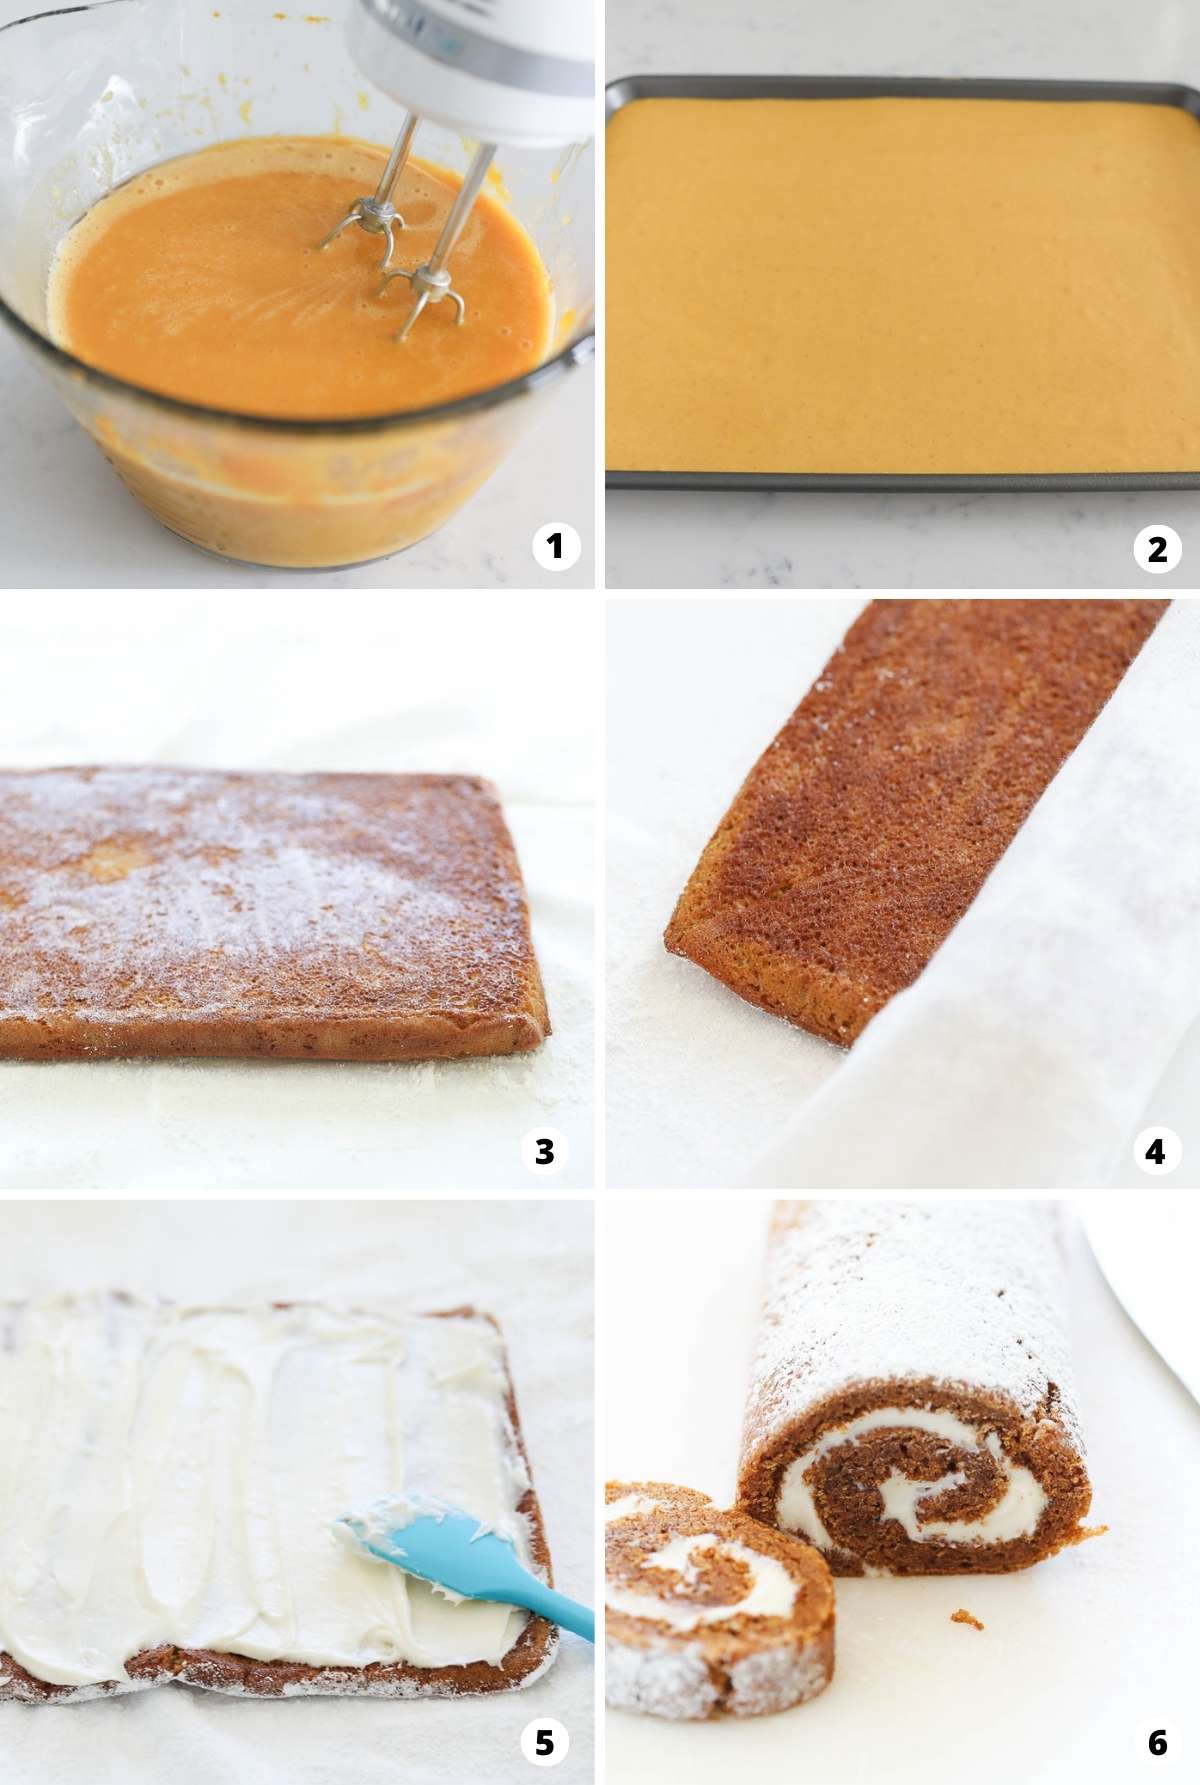 Showing how to make a pumpkin roll in a 6 step collage.